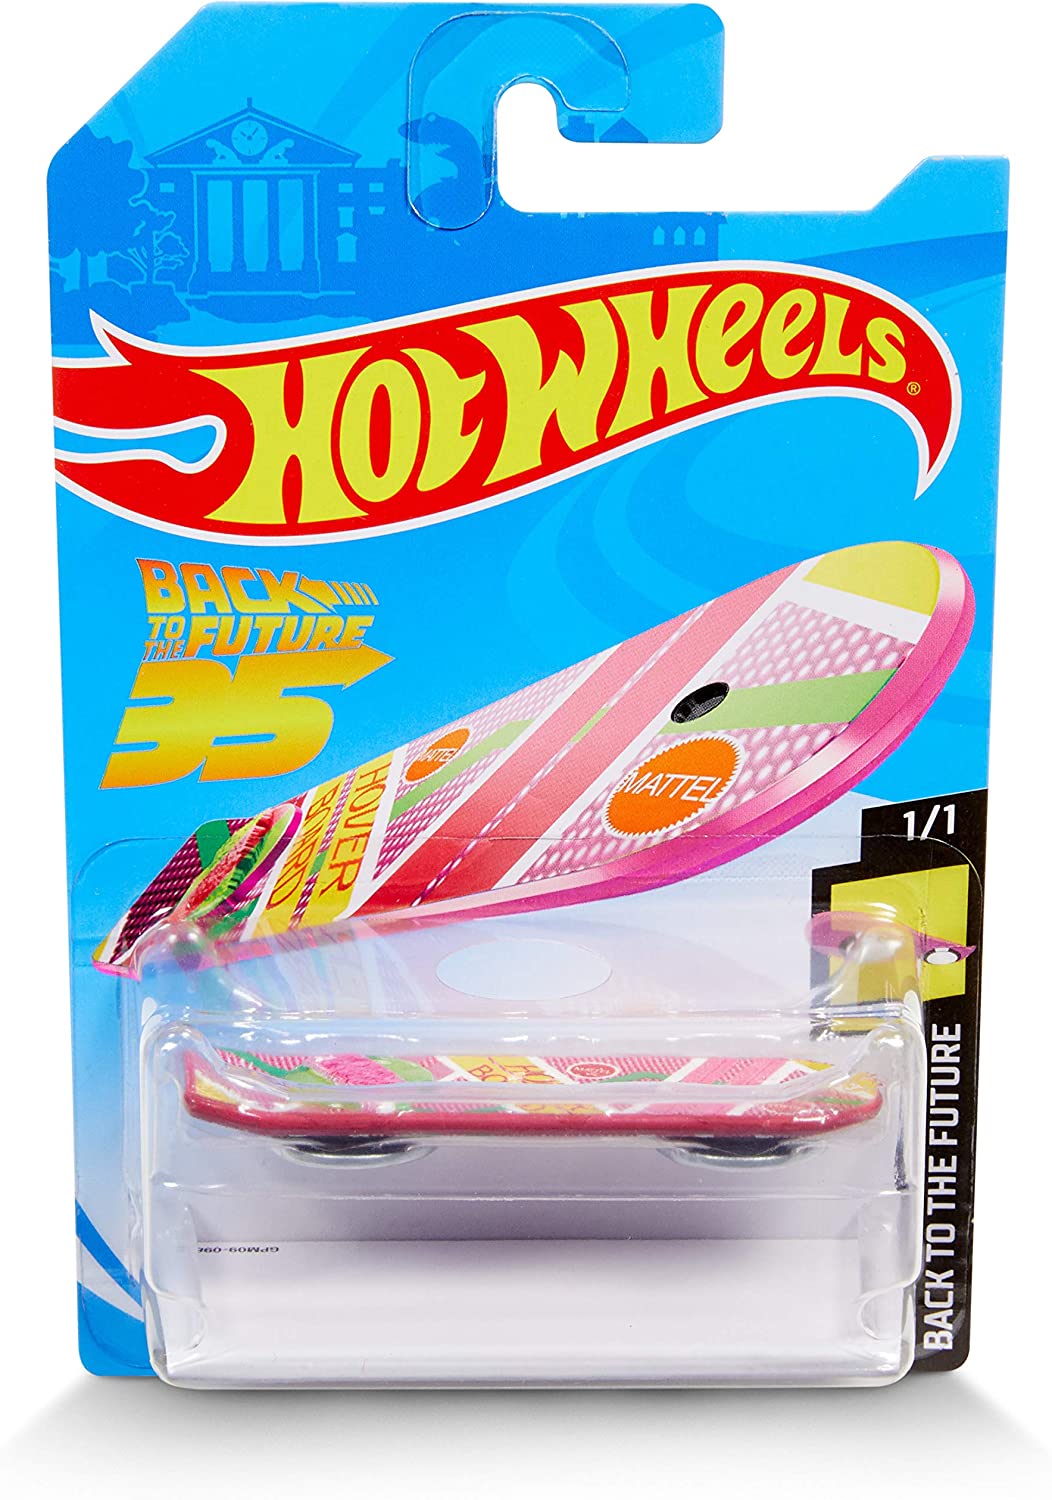 Hot Wheels Back to The Future 35th Anniversary Mattel Hoverboard Replica  Die-Cast Vehicle